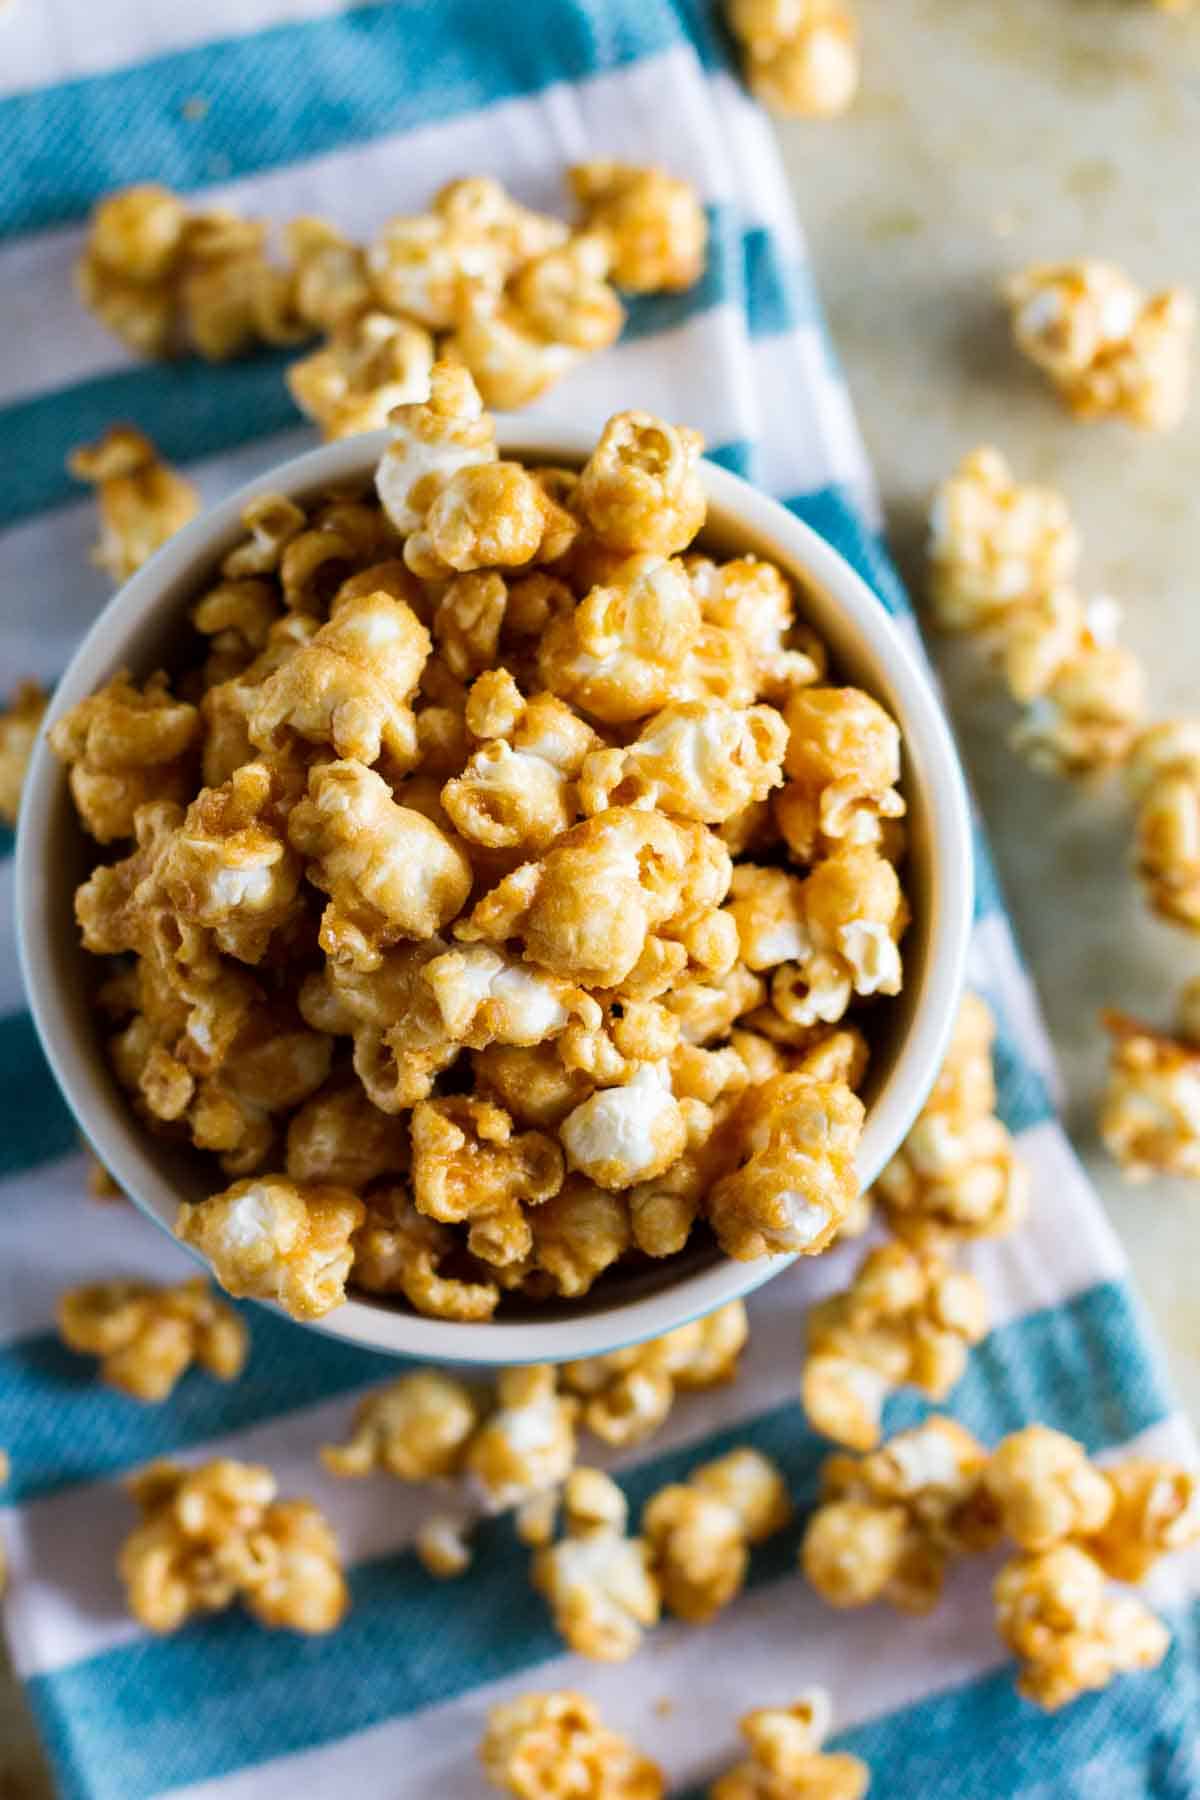 Baked caramel popcorn in a bowl, spilling out to the table below.